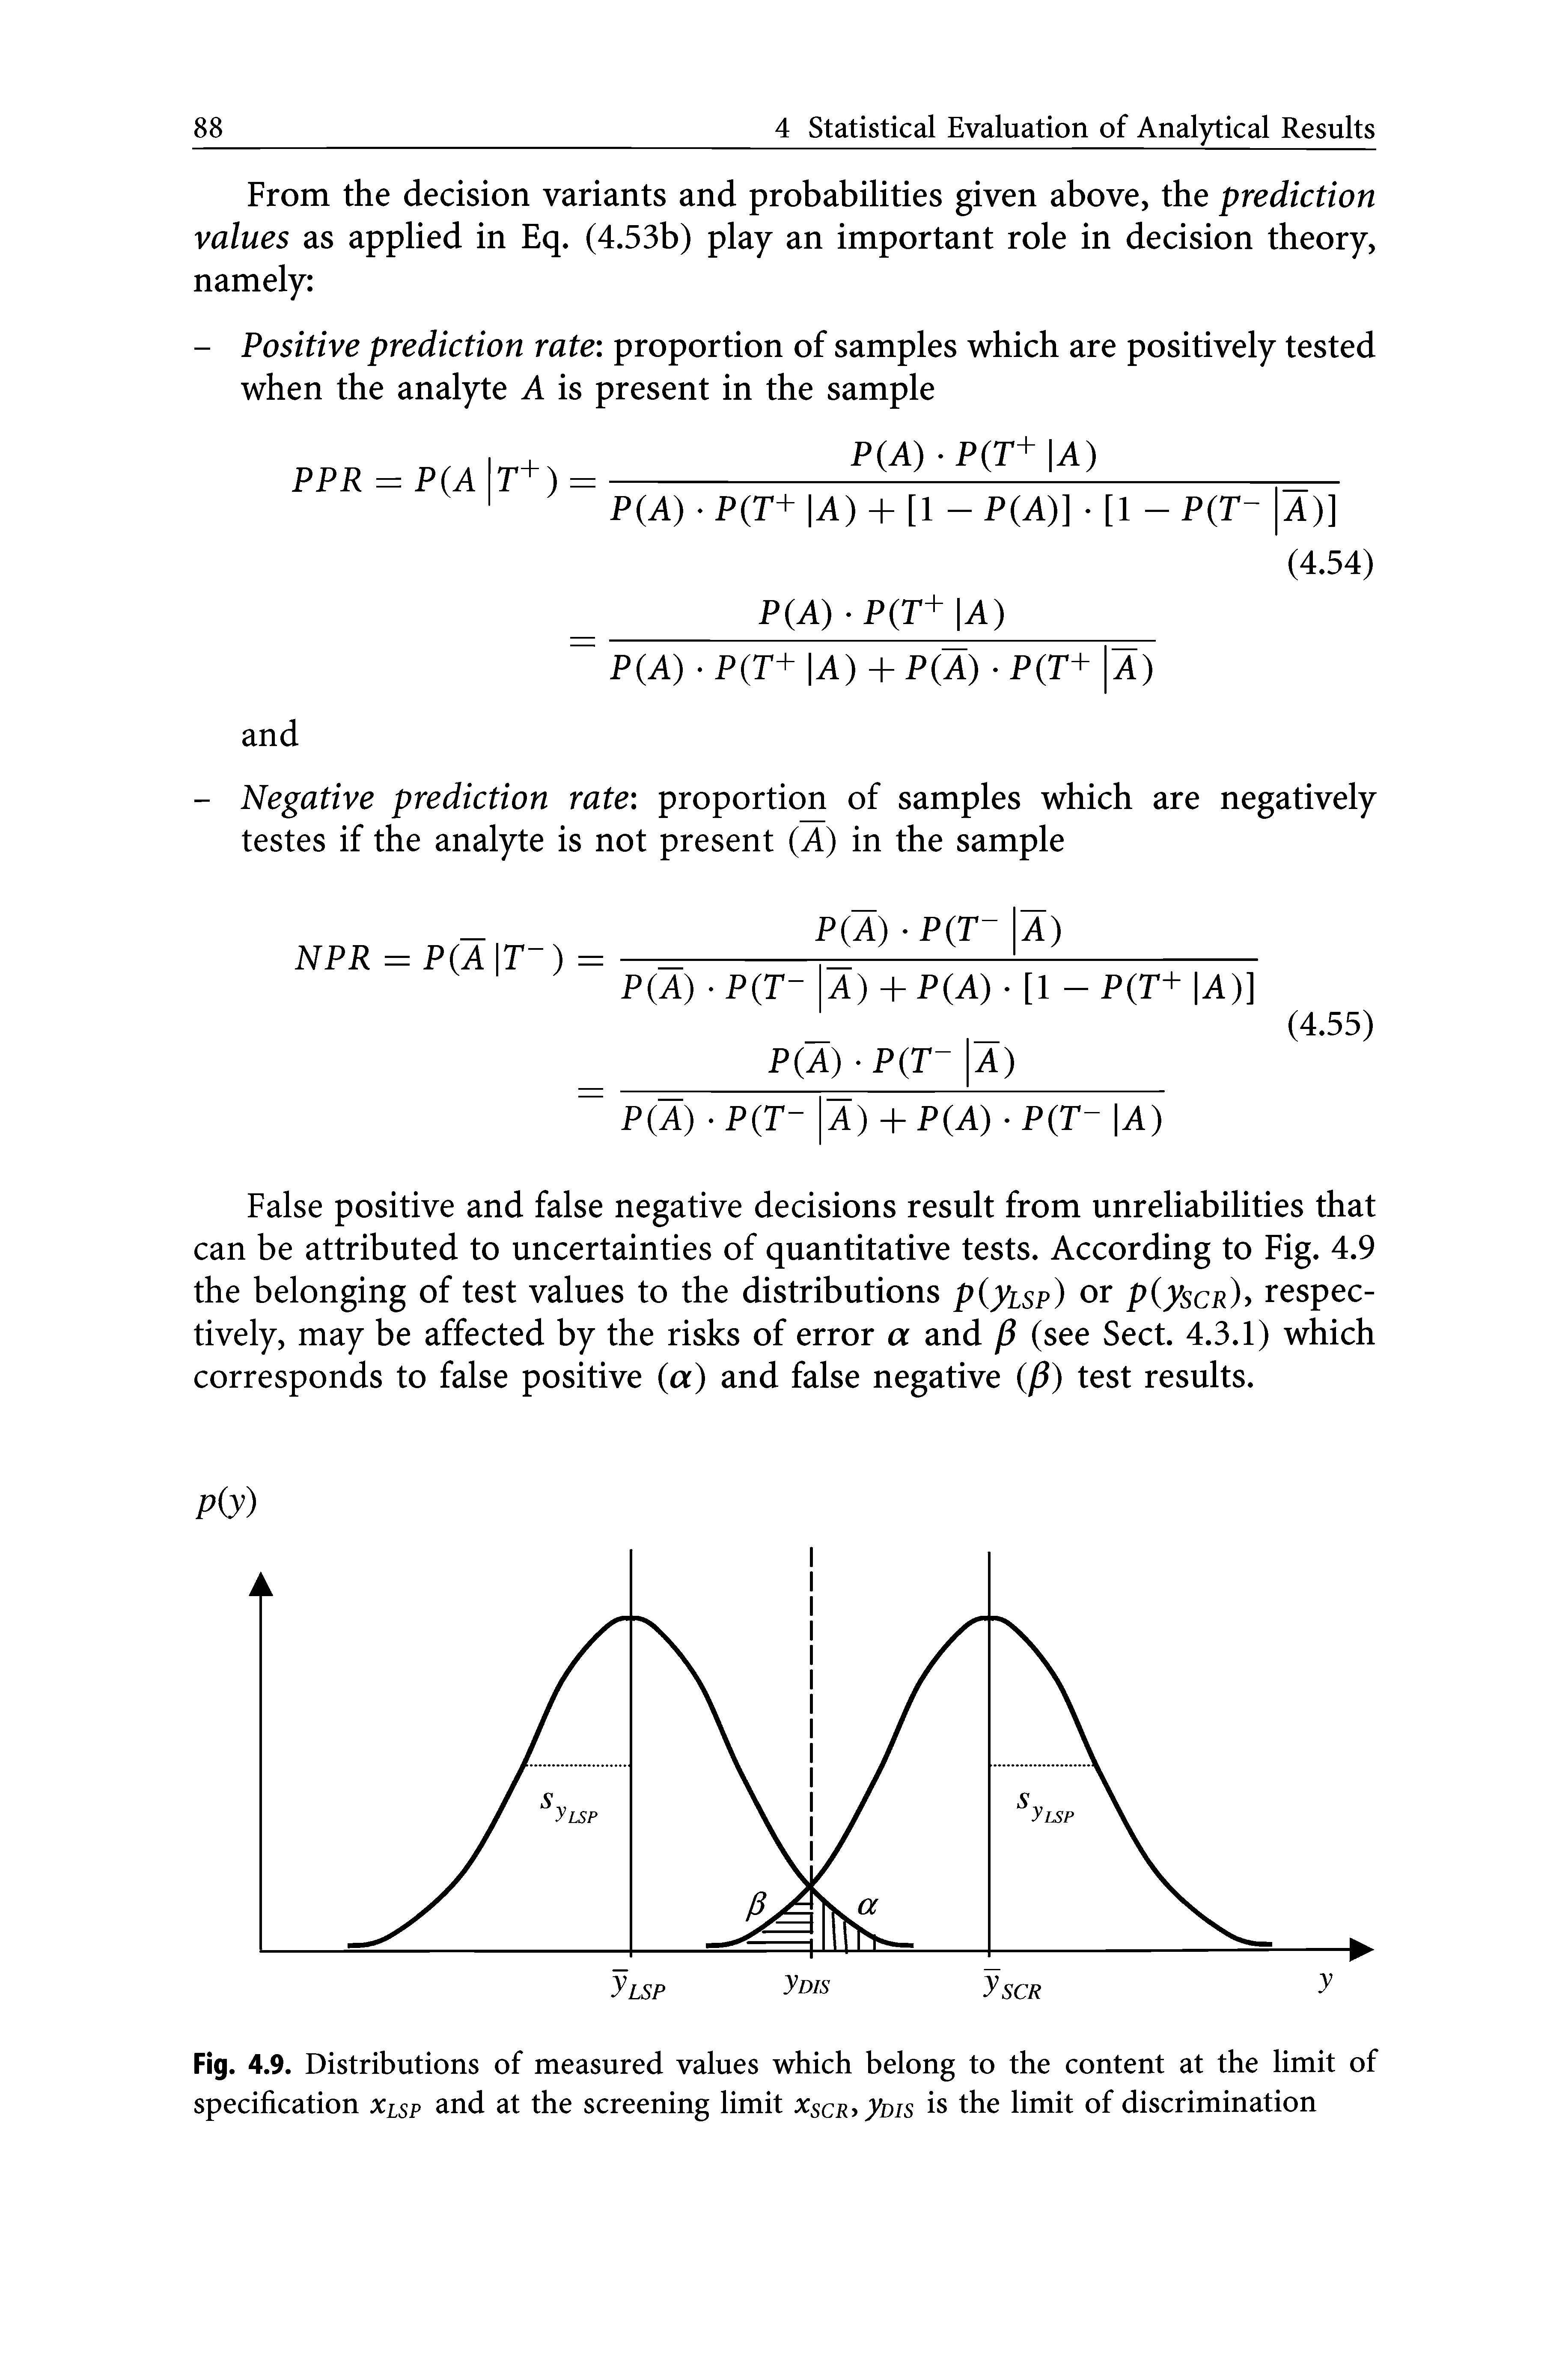 Fig. 4.9. Distributions of measured values which belong to the content at the limit of specification xLSp and at the screening limit Xscr dis is the limit of discrimination...